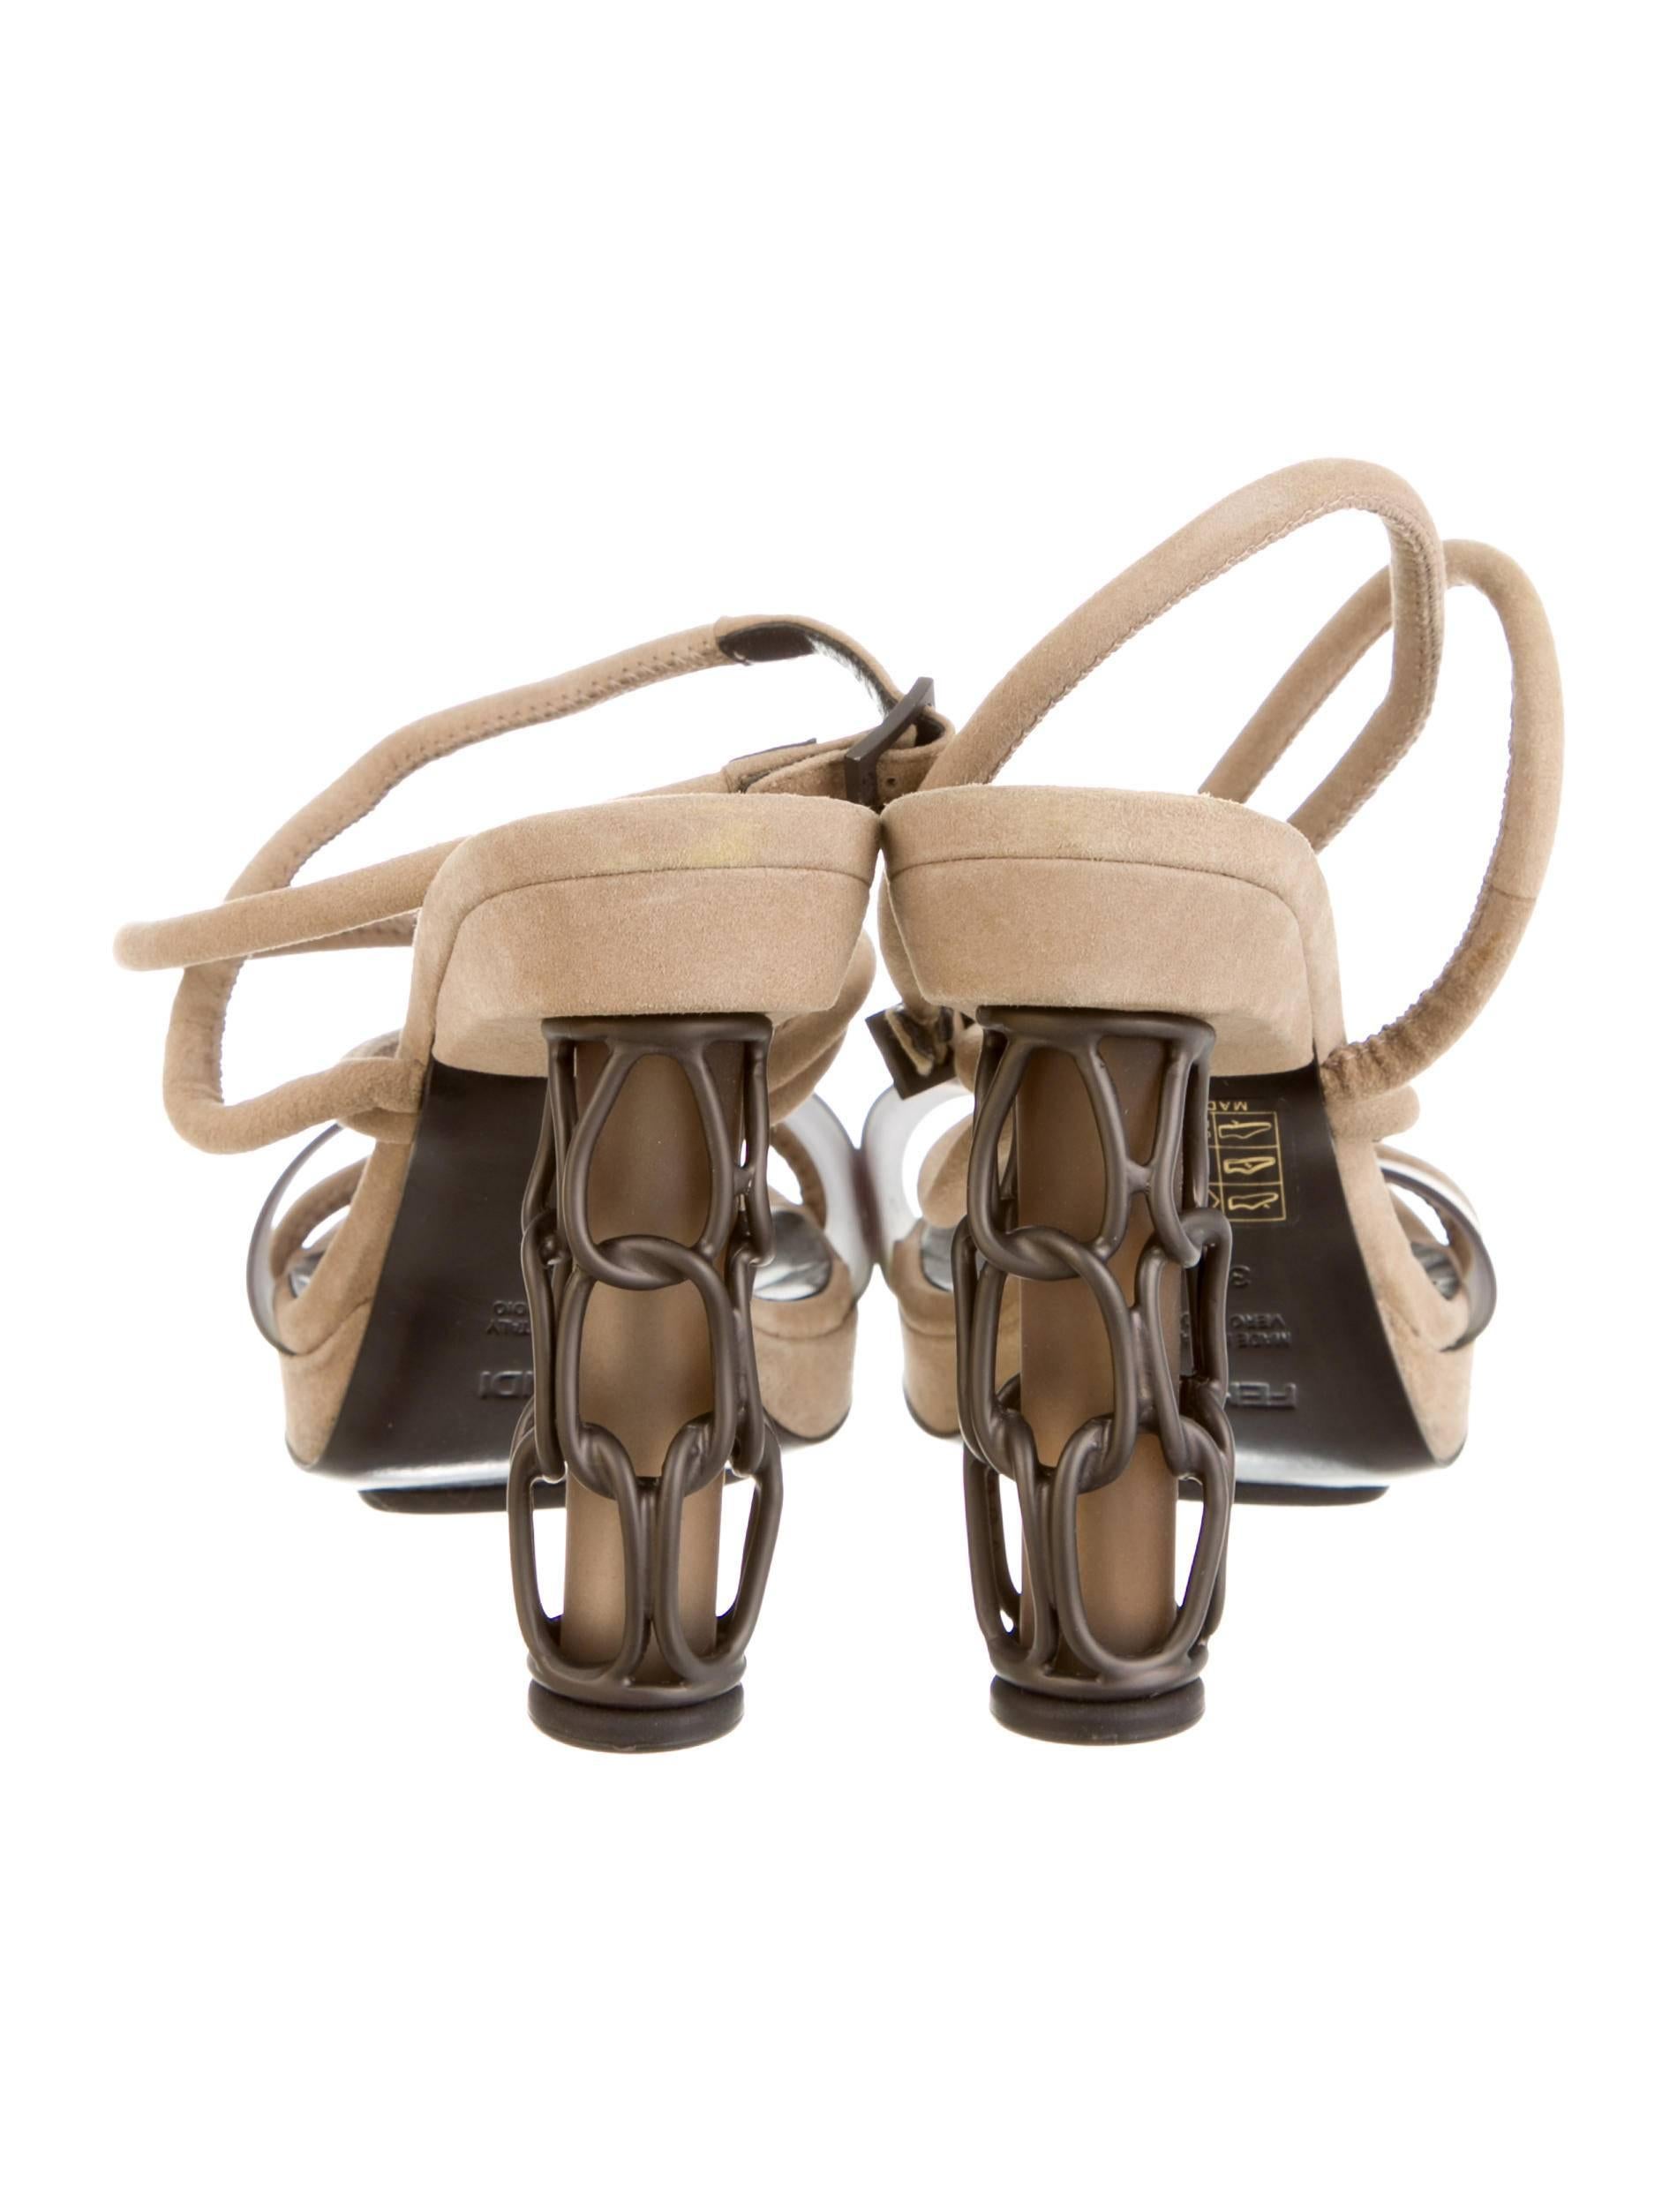 CURATOR'S NOTES

Size IT 38.5 (US 8.5)
Suede 
PVC 
Metal
Buckle ankle closure
Made in Italy
Heel height 5